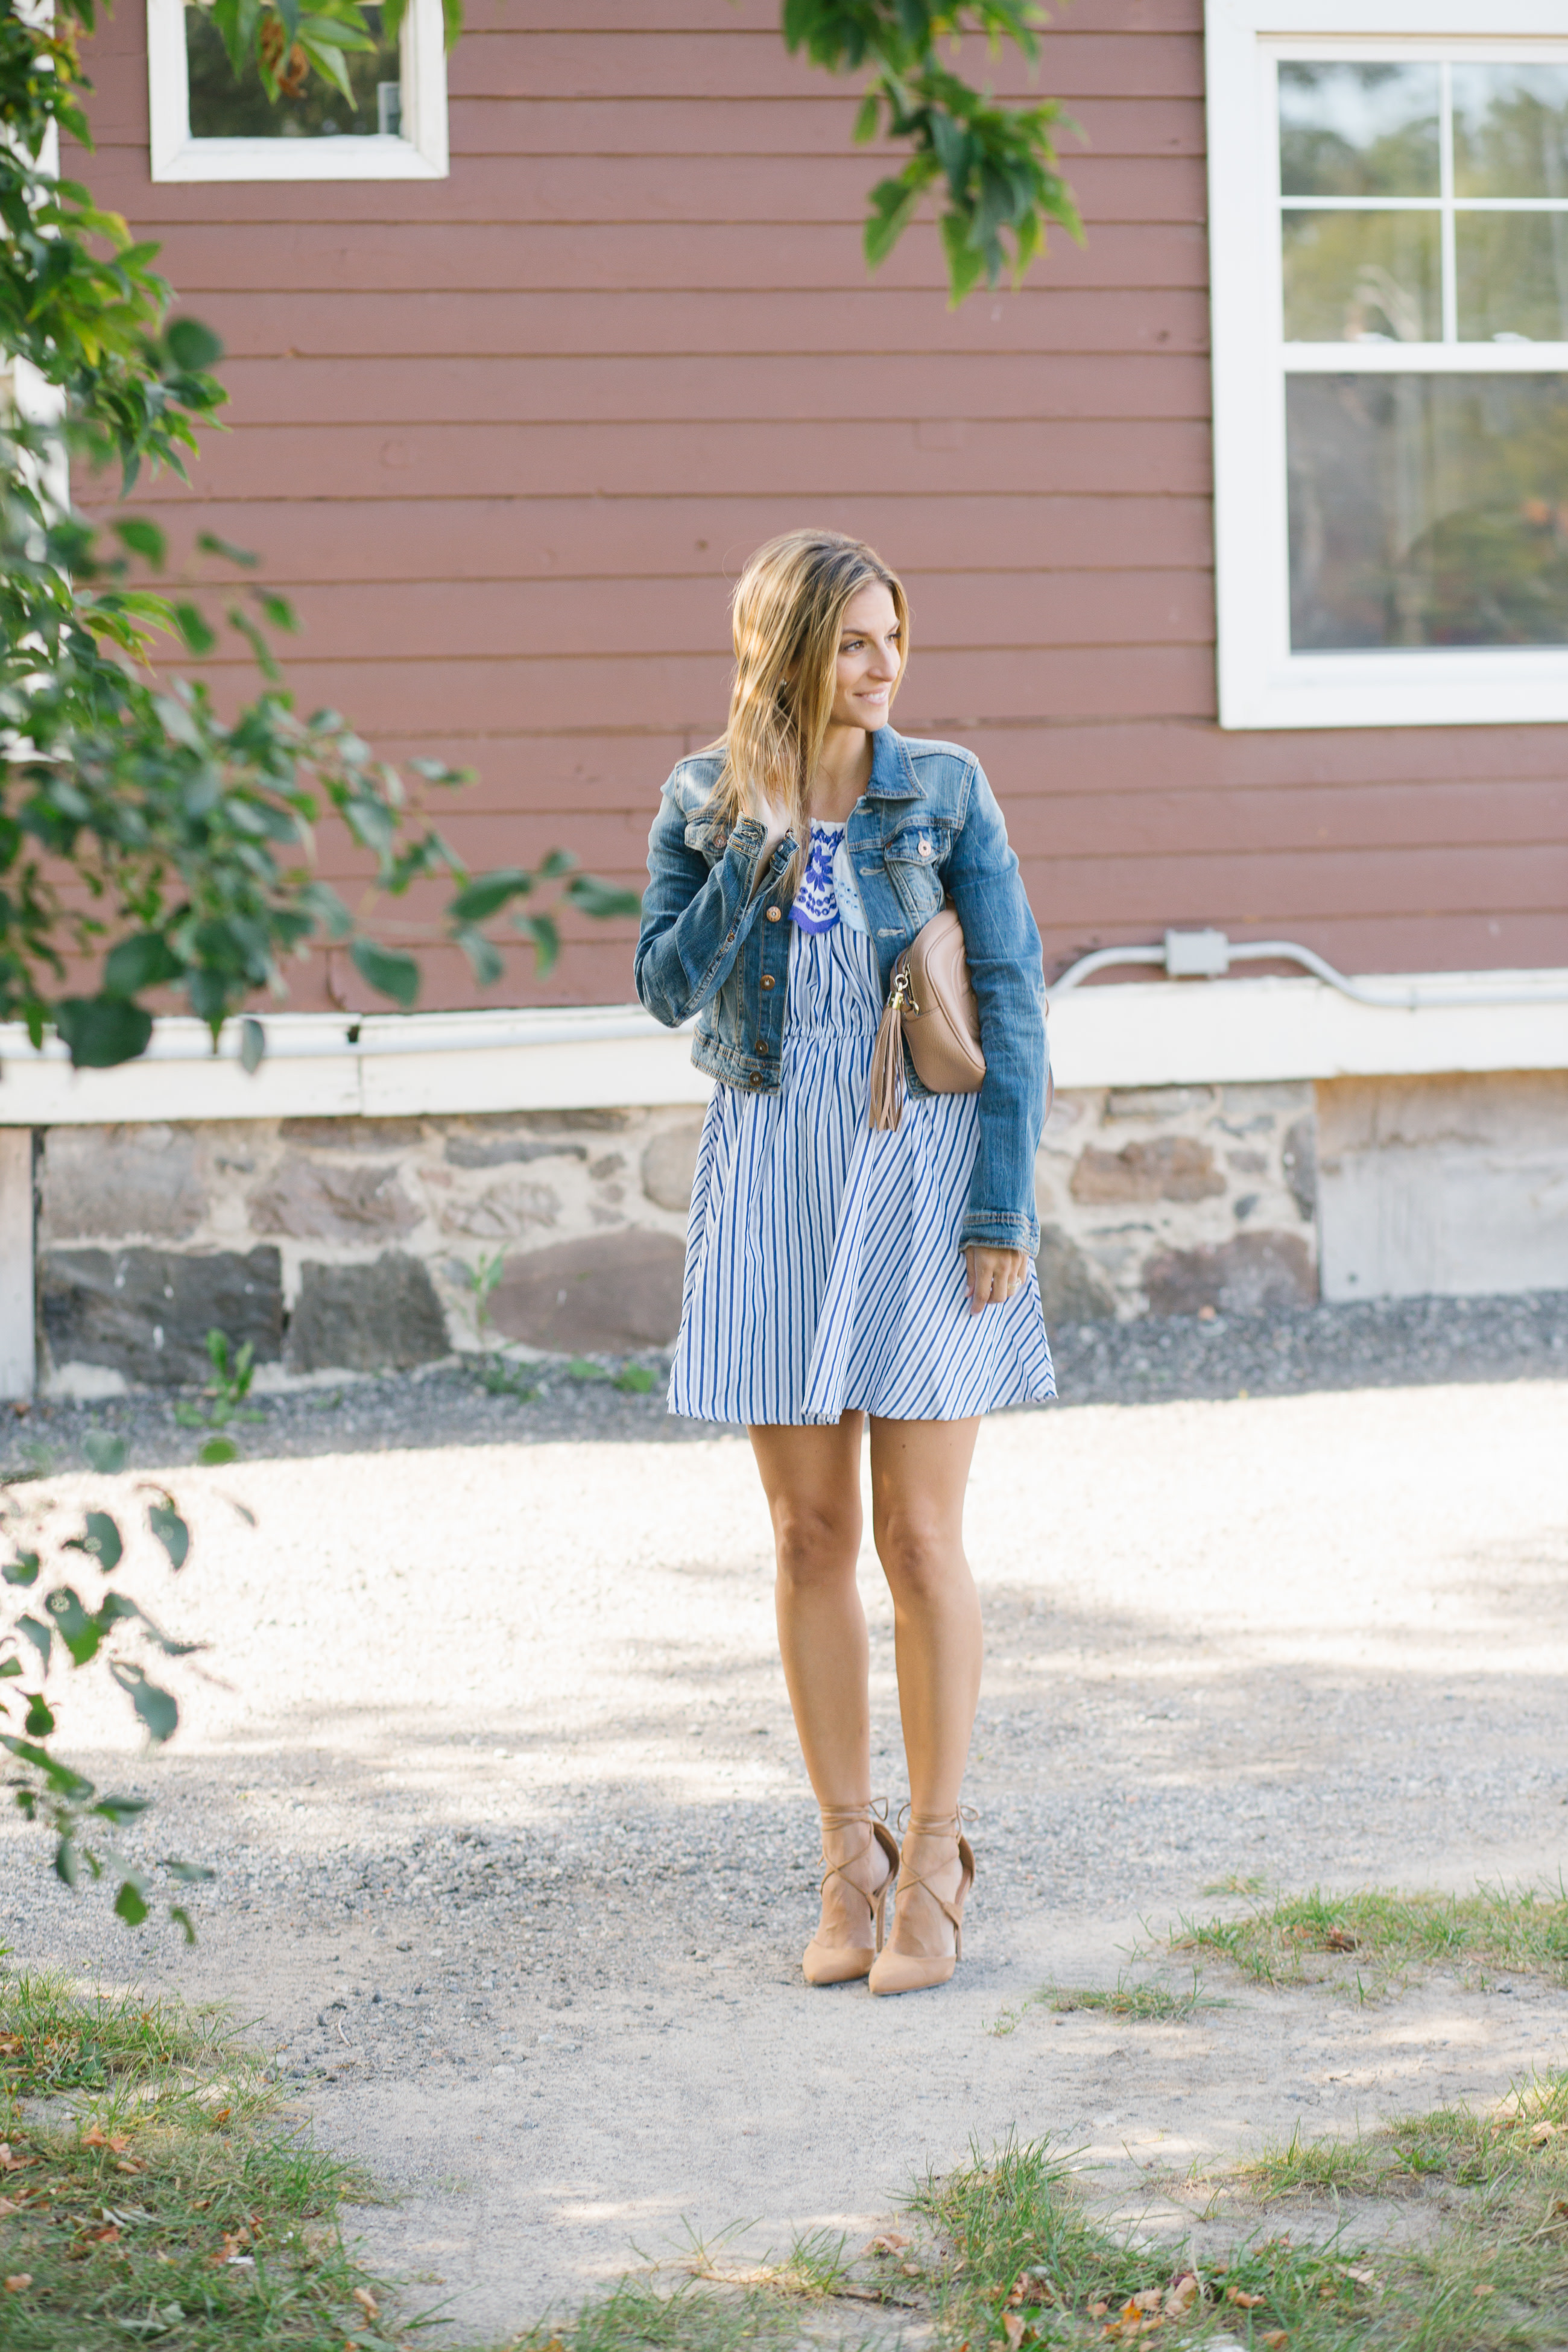 styling a jean jacket with a summer dress